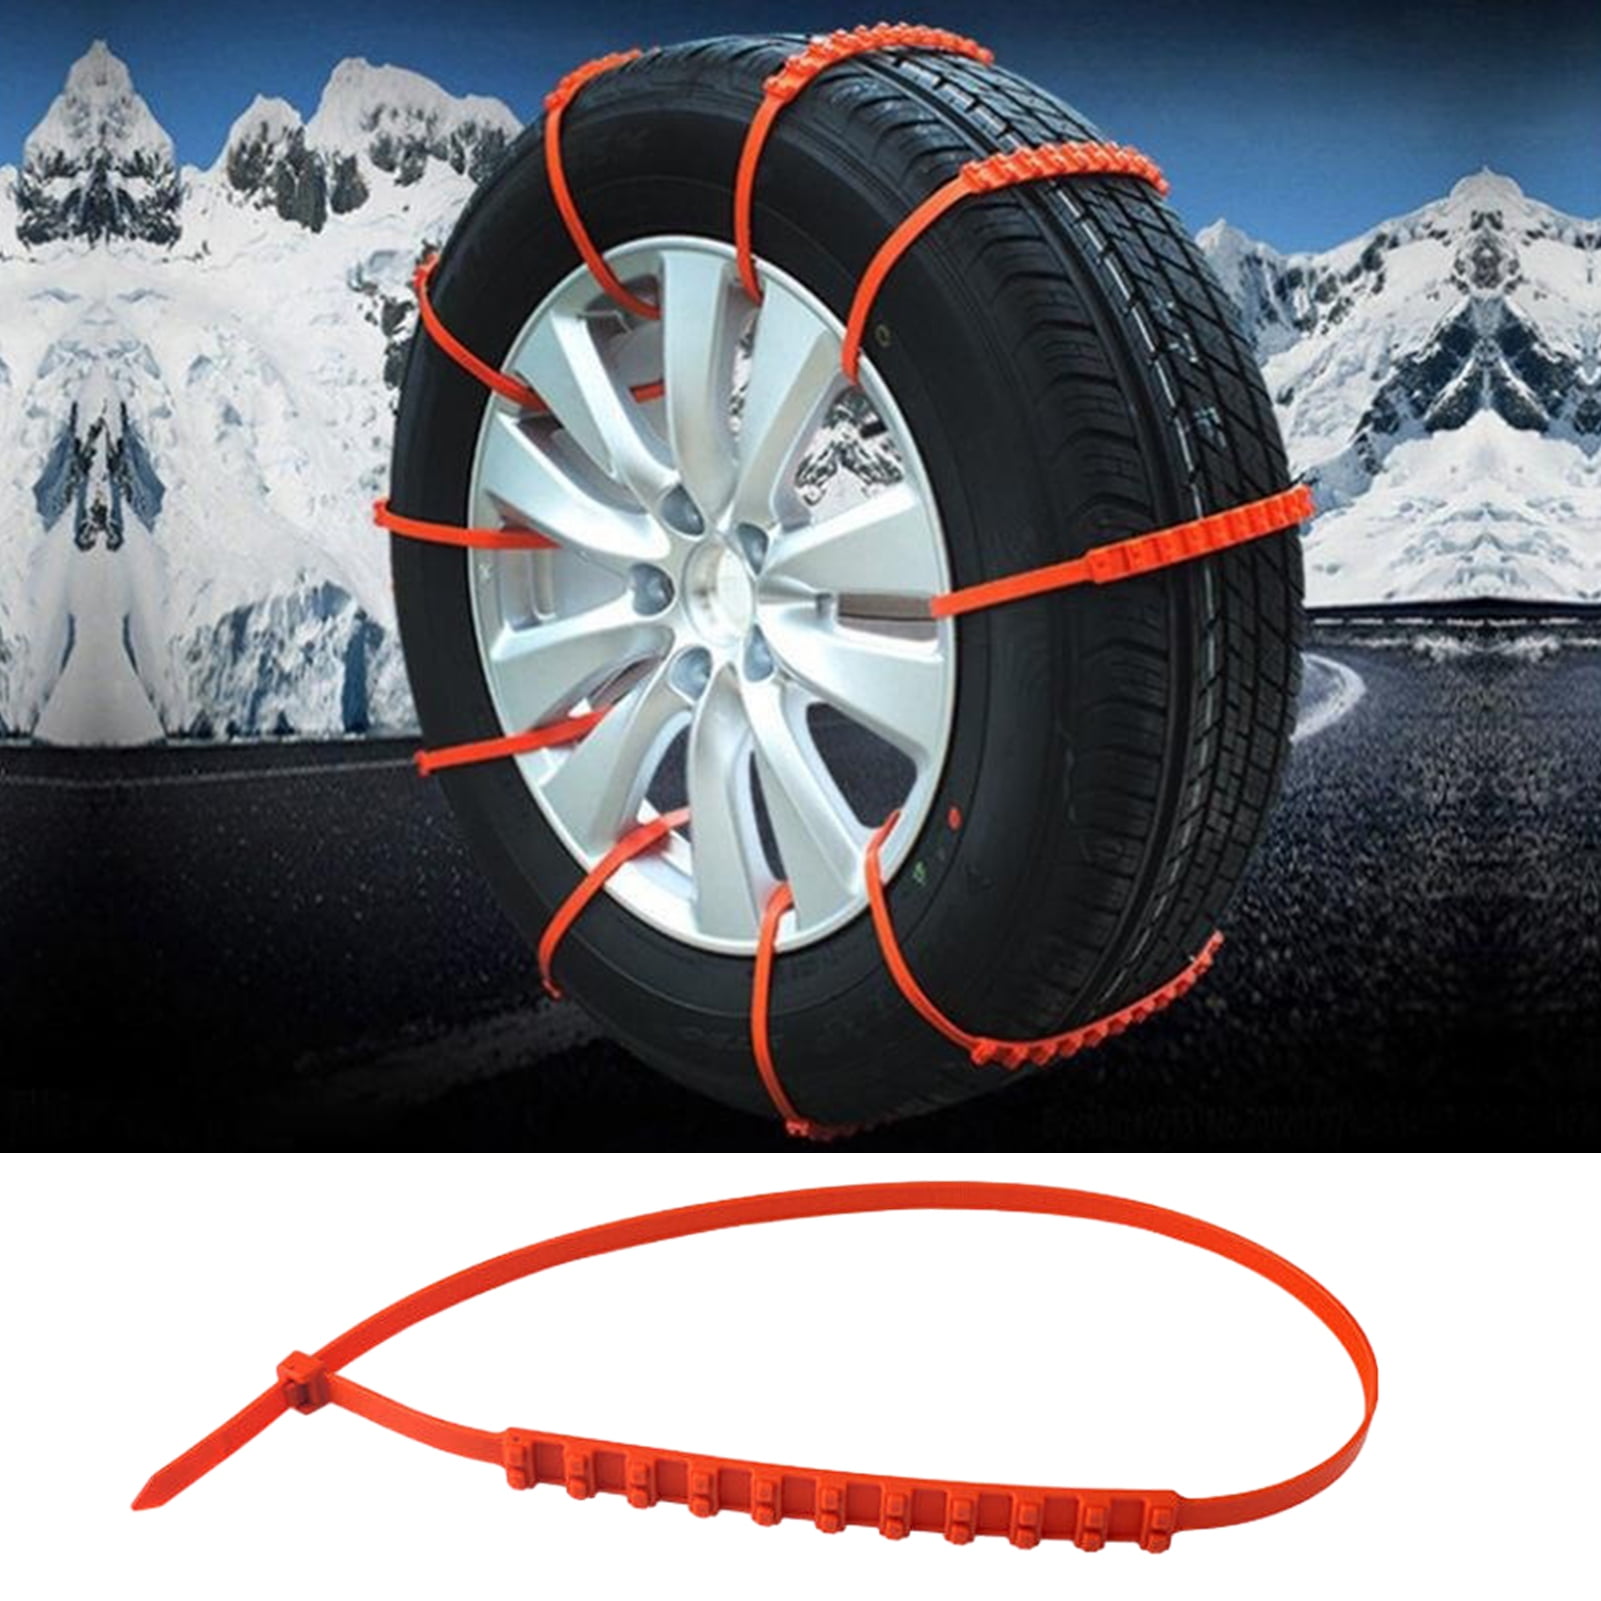 Cheap 12Pcs Car Snow Chain Adjustable Safe Driving Easy to Install